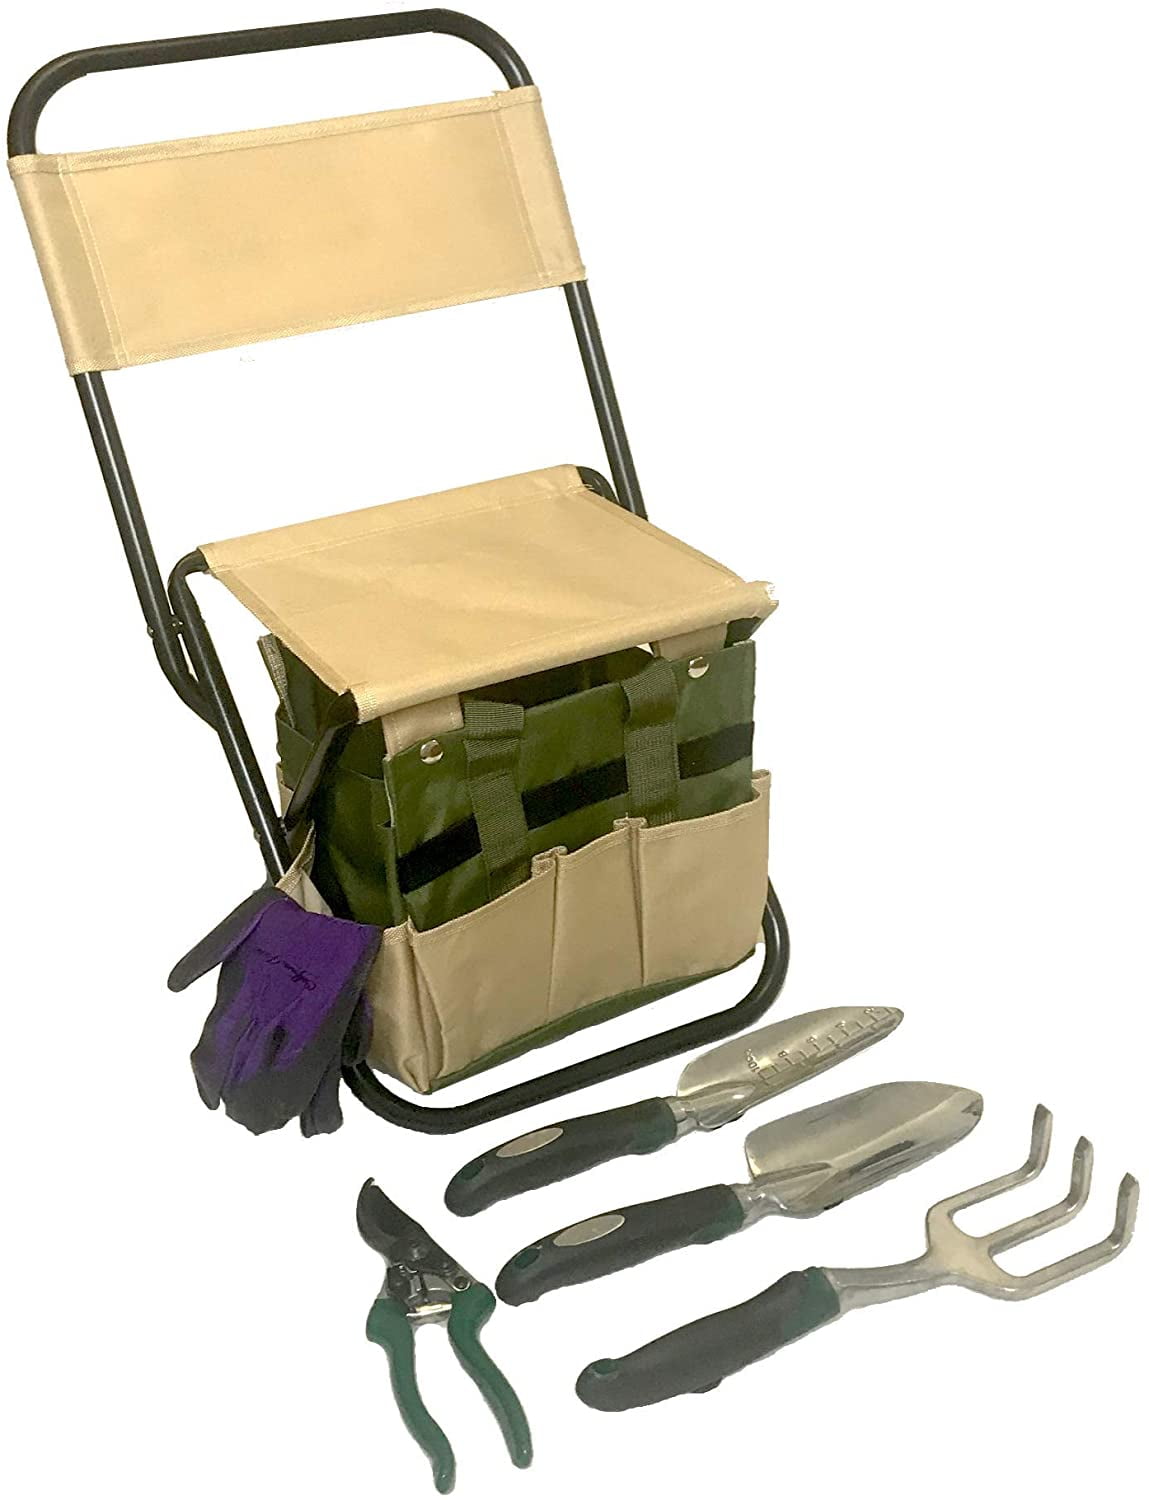 Folding Garden Stool Wooden Seat with Tote Gardening Tool Bag Plant Theatre 